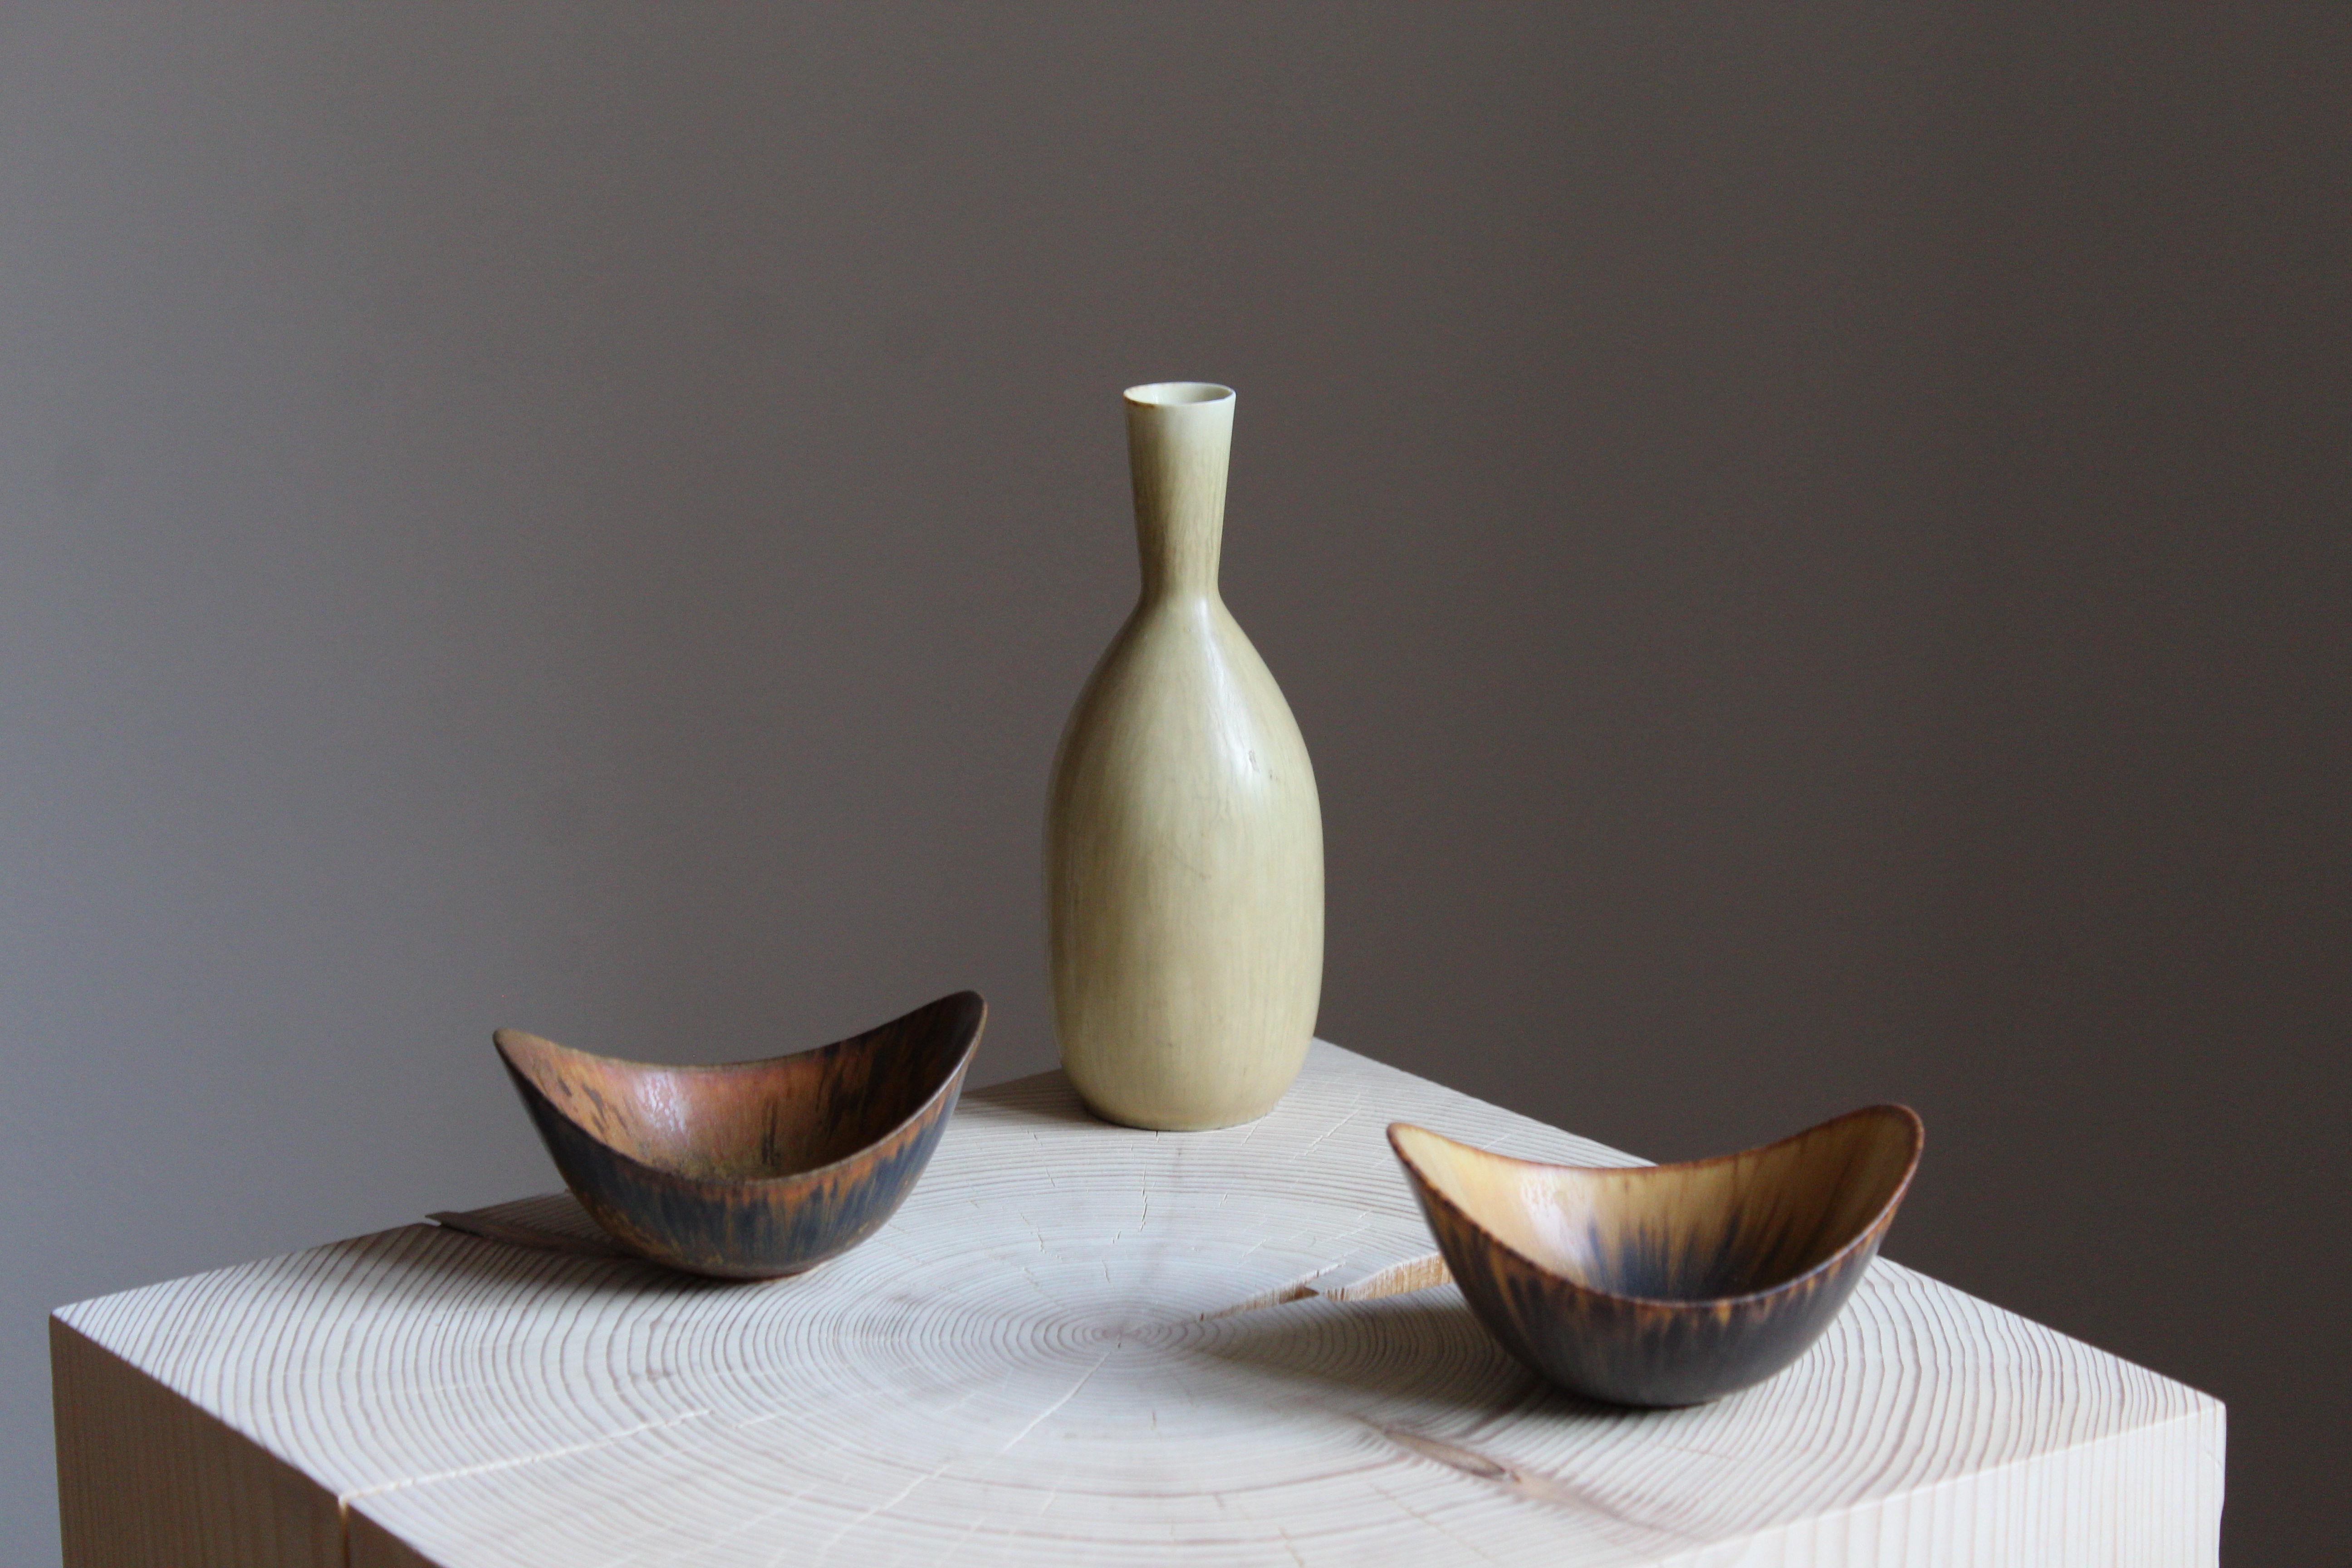 An assorted collection of small 1 vase and small 2 bowls executed in stoneware and produced by Rörstrands, Sweden, 1940s. The vase and one bowl are factory seconds.


Has a similar style as works by ceramicists such as Axel Salto, Carl-Harry